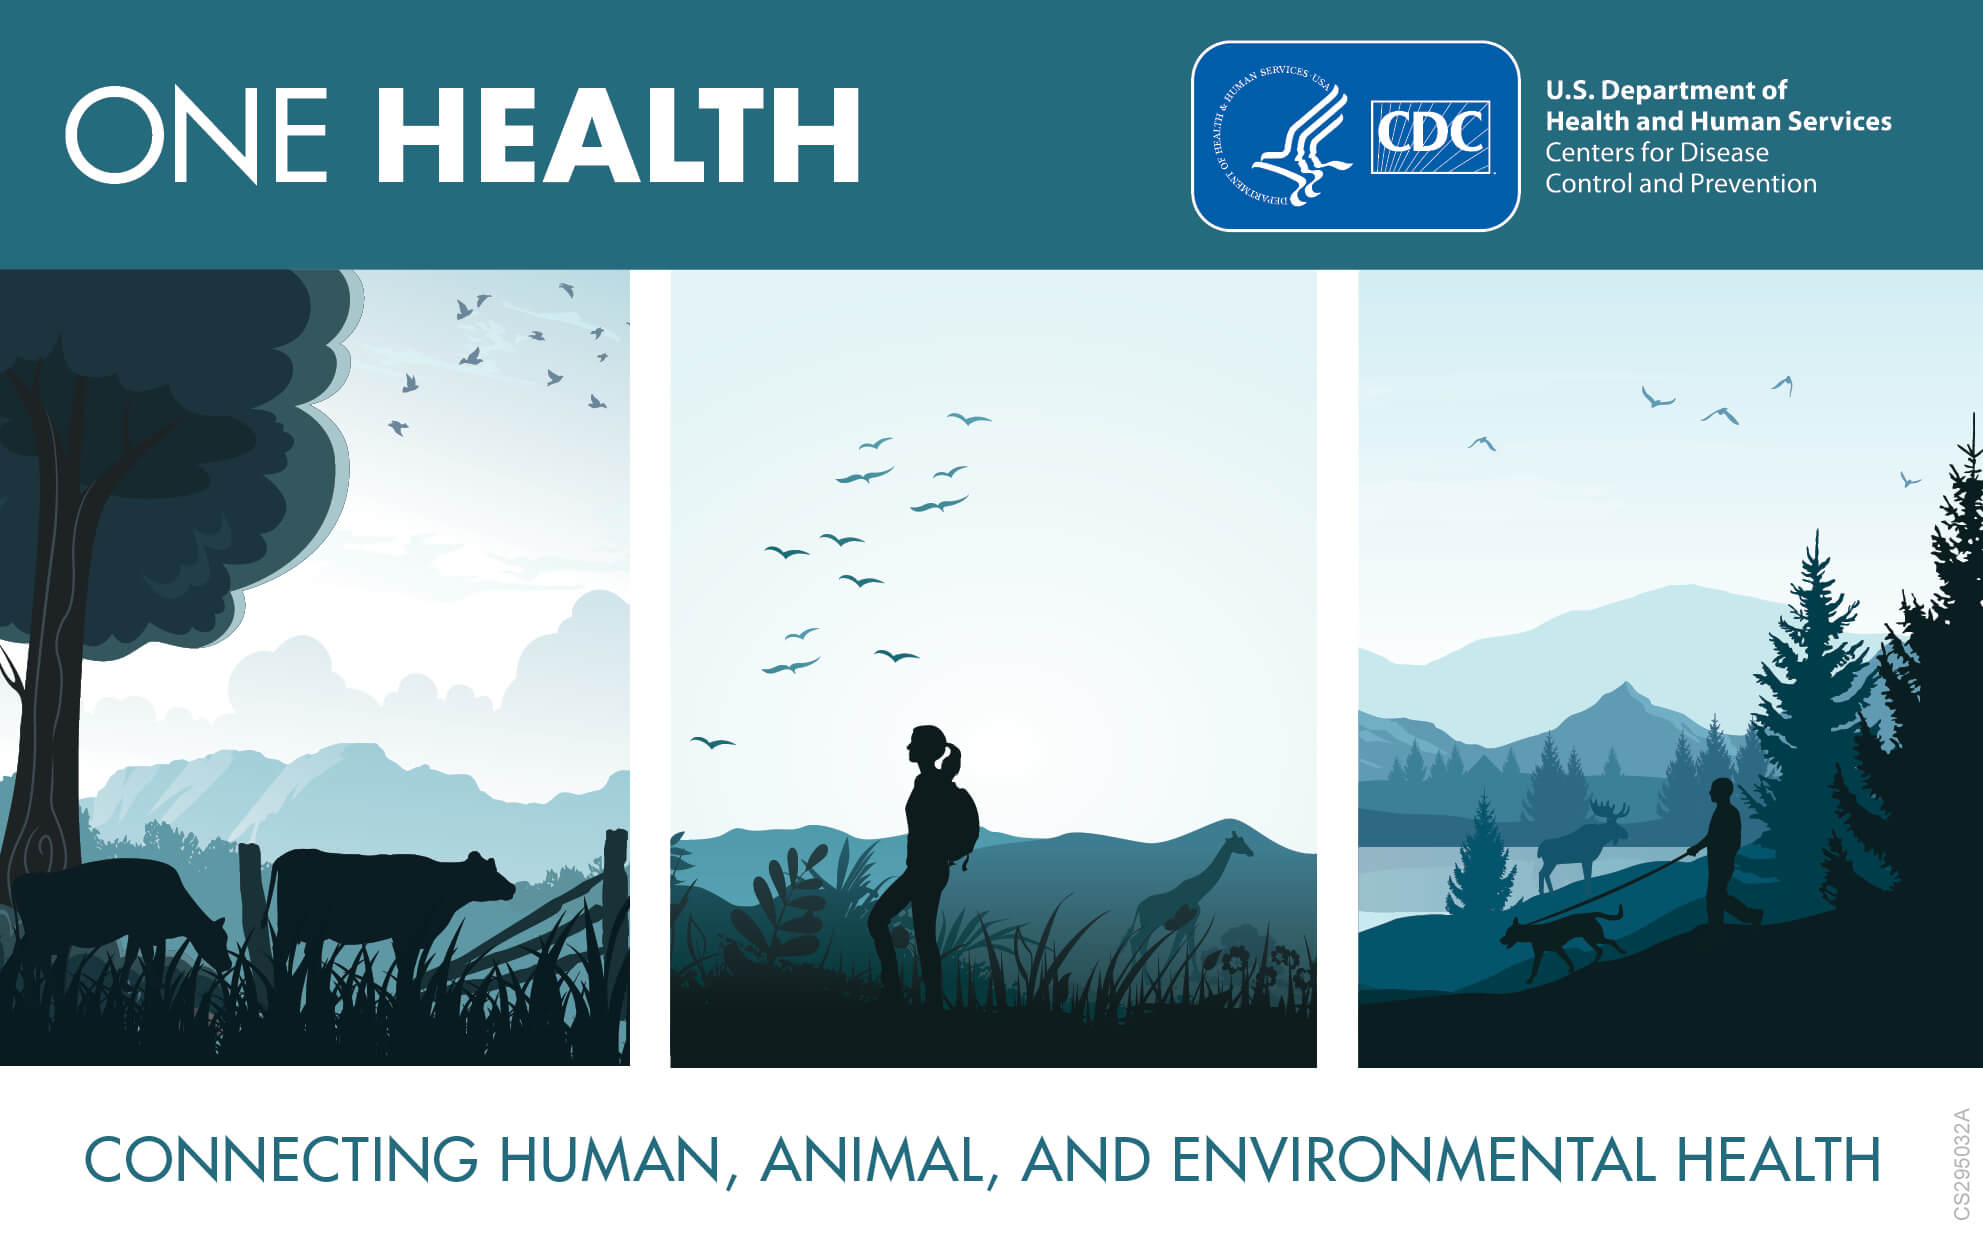 One Health graphic provided by the CDC. Includes three illustrations in columns: cows in a field with a tree and a fence; a woman silhouette backpacking. Birds in the sky, giraffe in the background; a an silhouette walking a dog near a stream, moose in the background. All are connected by mountains in the far distance.